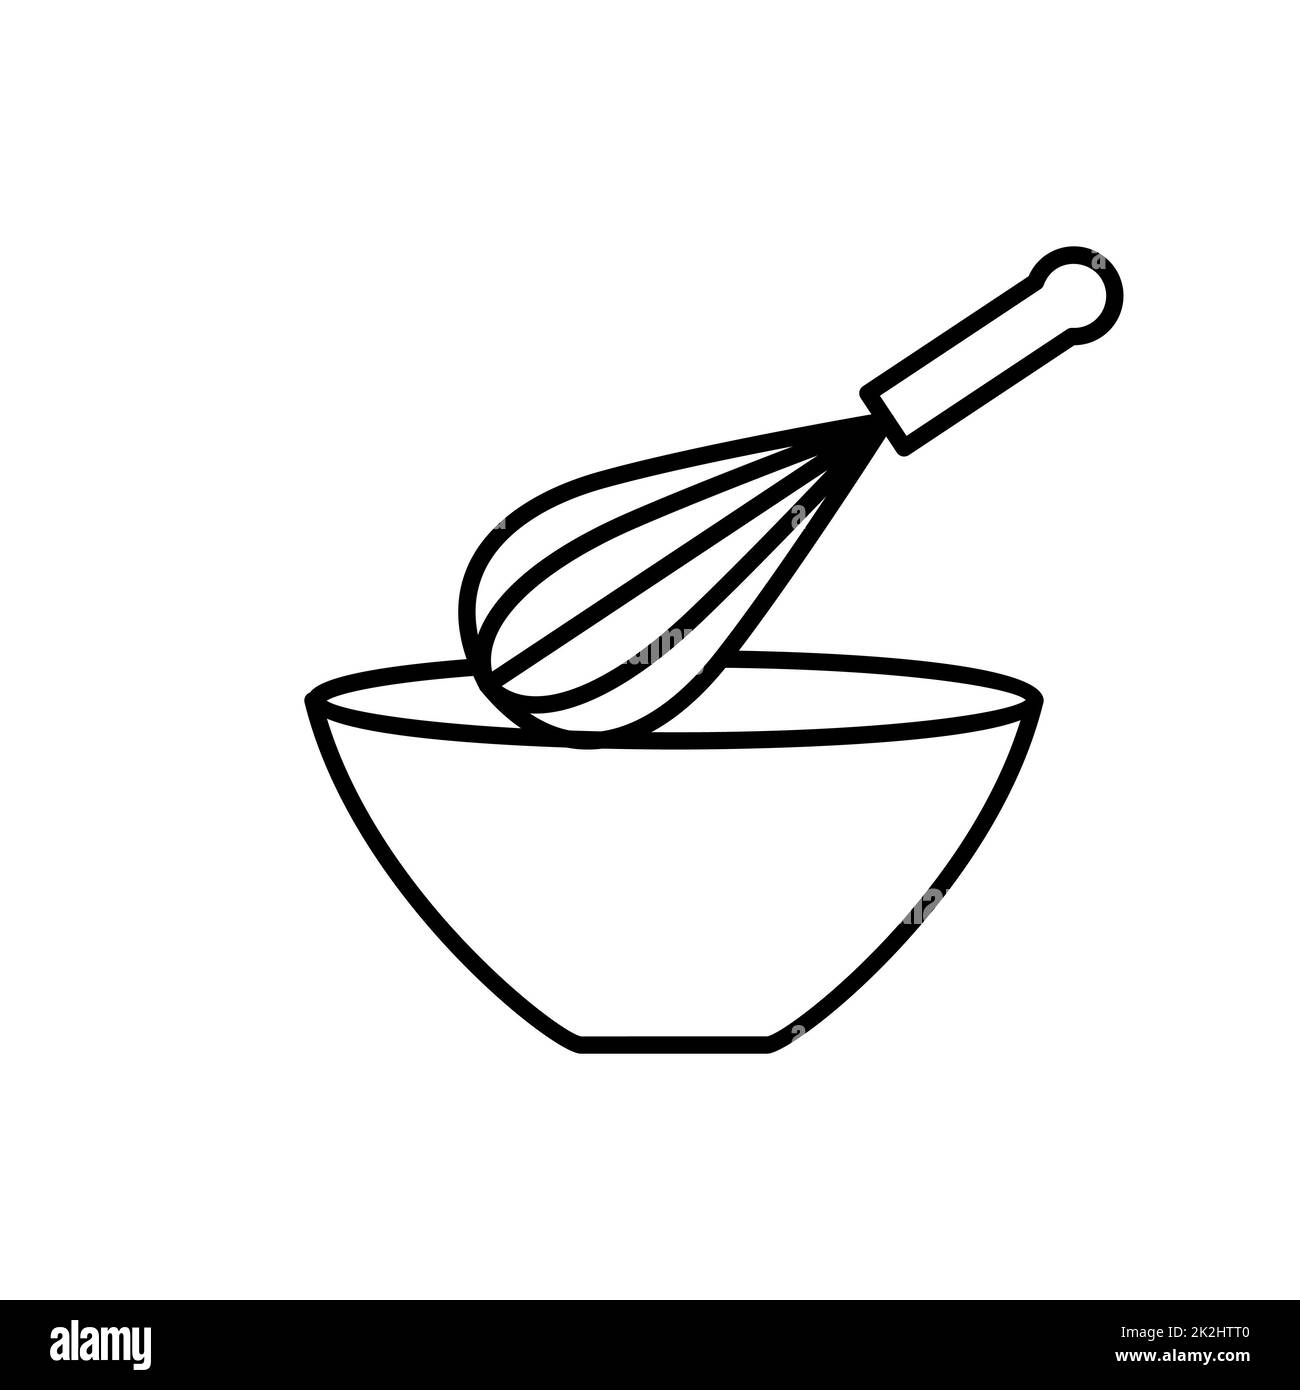 Thin line kitchen whisk icon isolated on white background - Vector Stock Photo